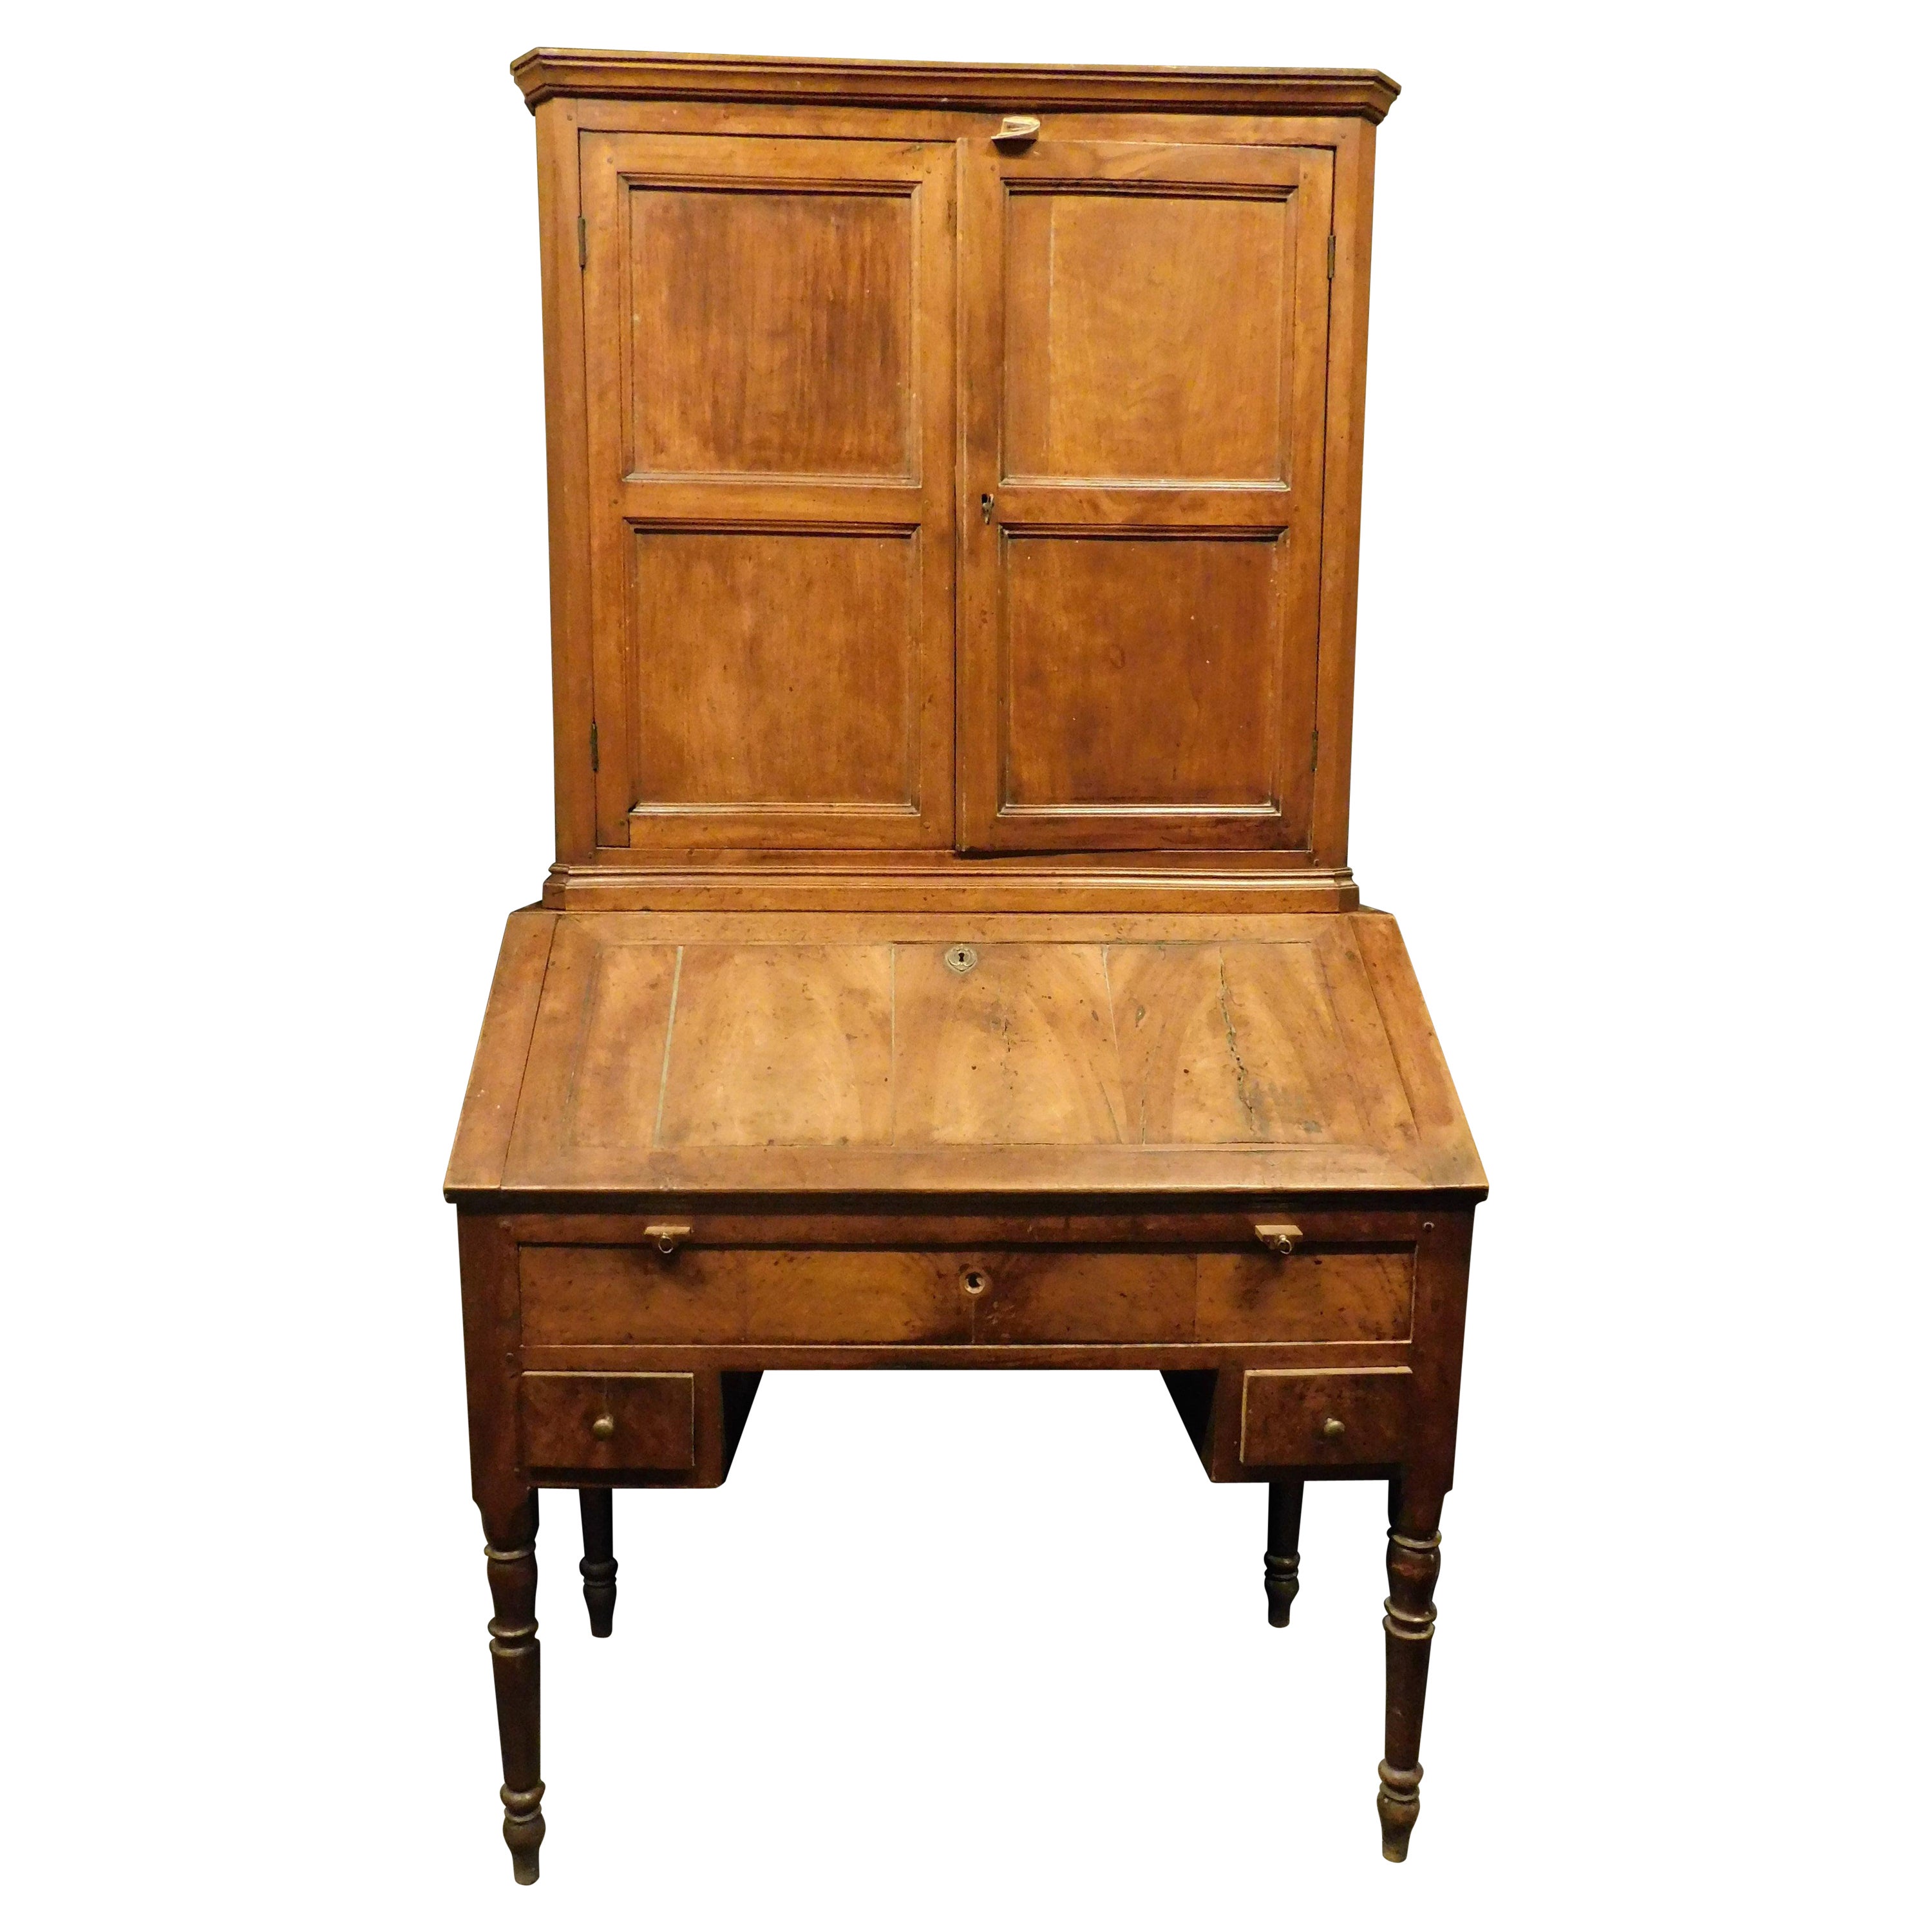 Cabinet with flap, walnut desk, Italy